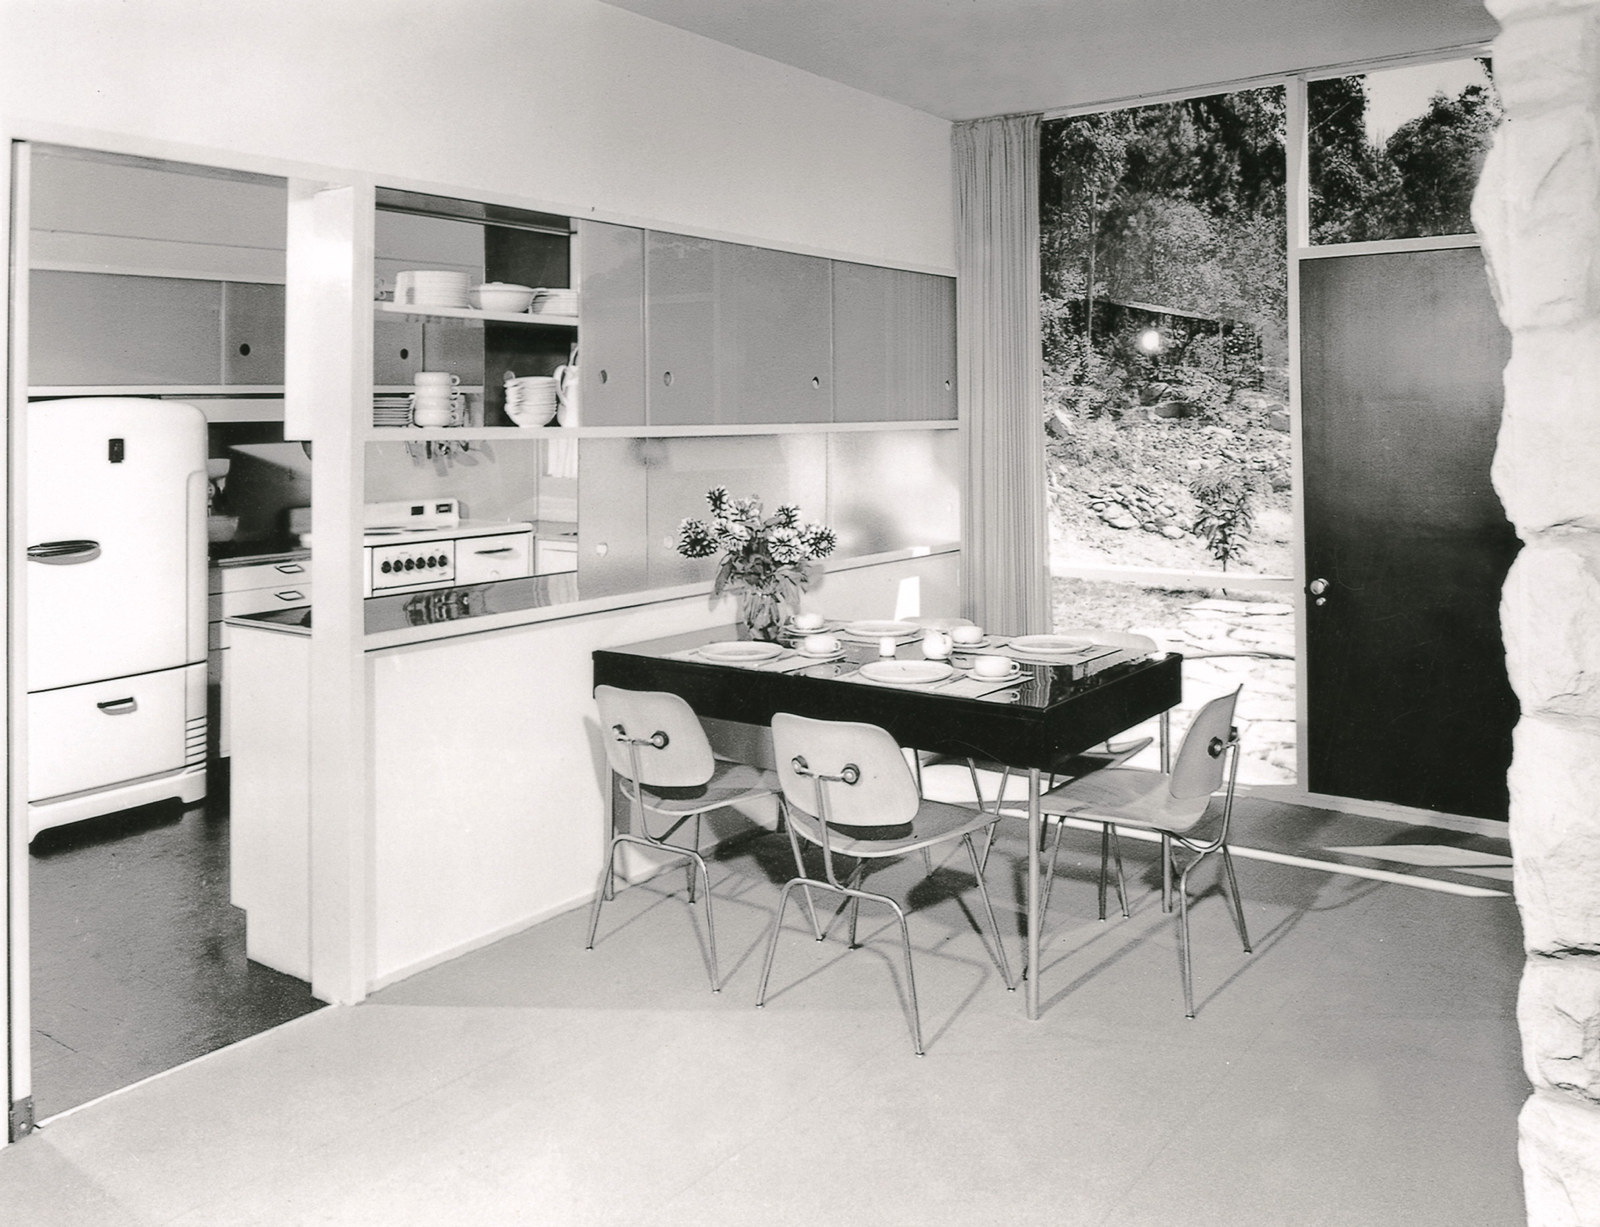 Black and white photo of dining room table and chairs with window and kitchen in background.